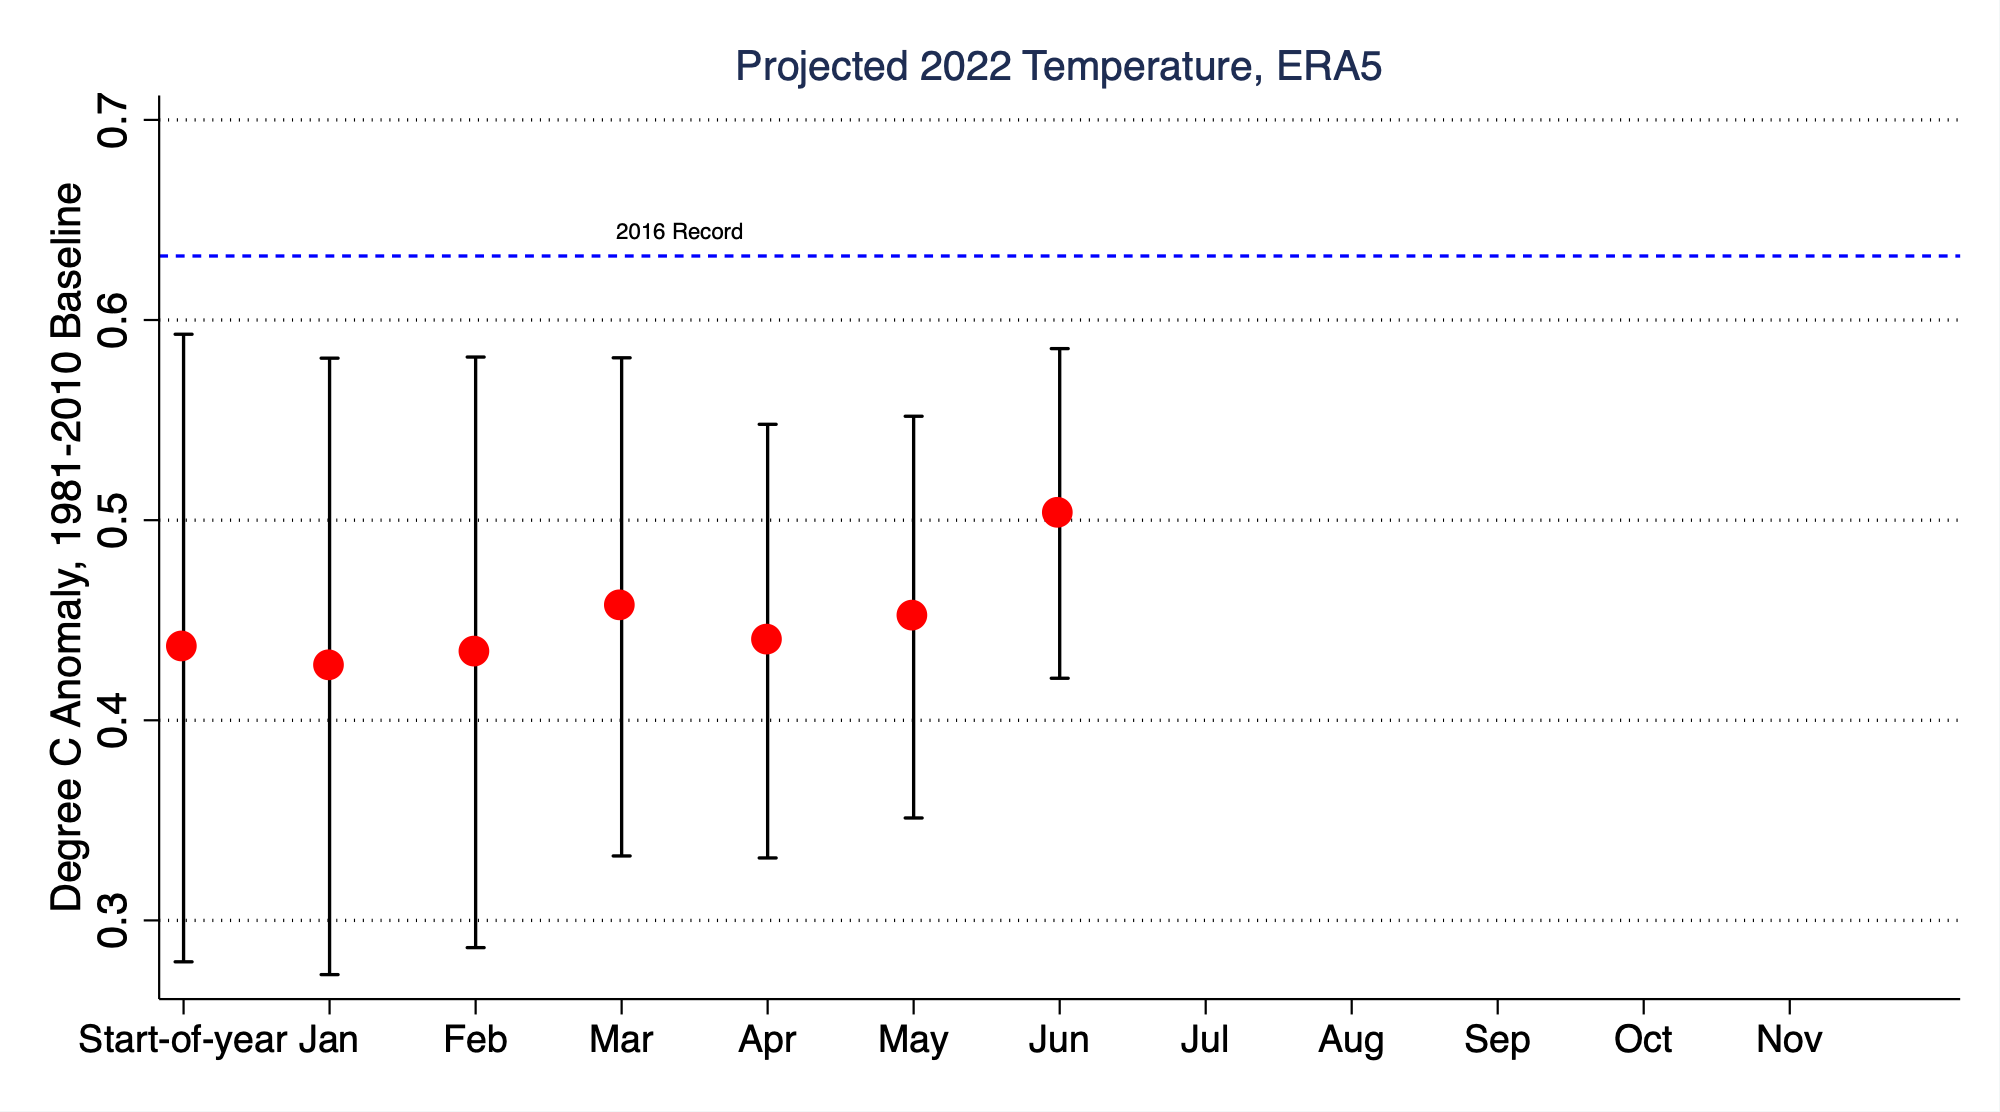 Carbon Brief projections of likely 2022 annual temperatures based on the Copernicus/ECMWF dataset at the start of the year, and after each month of data is available.